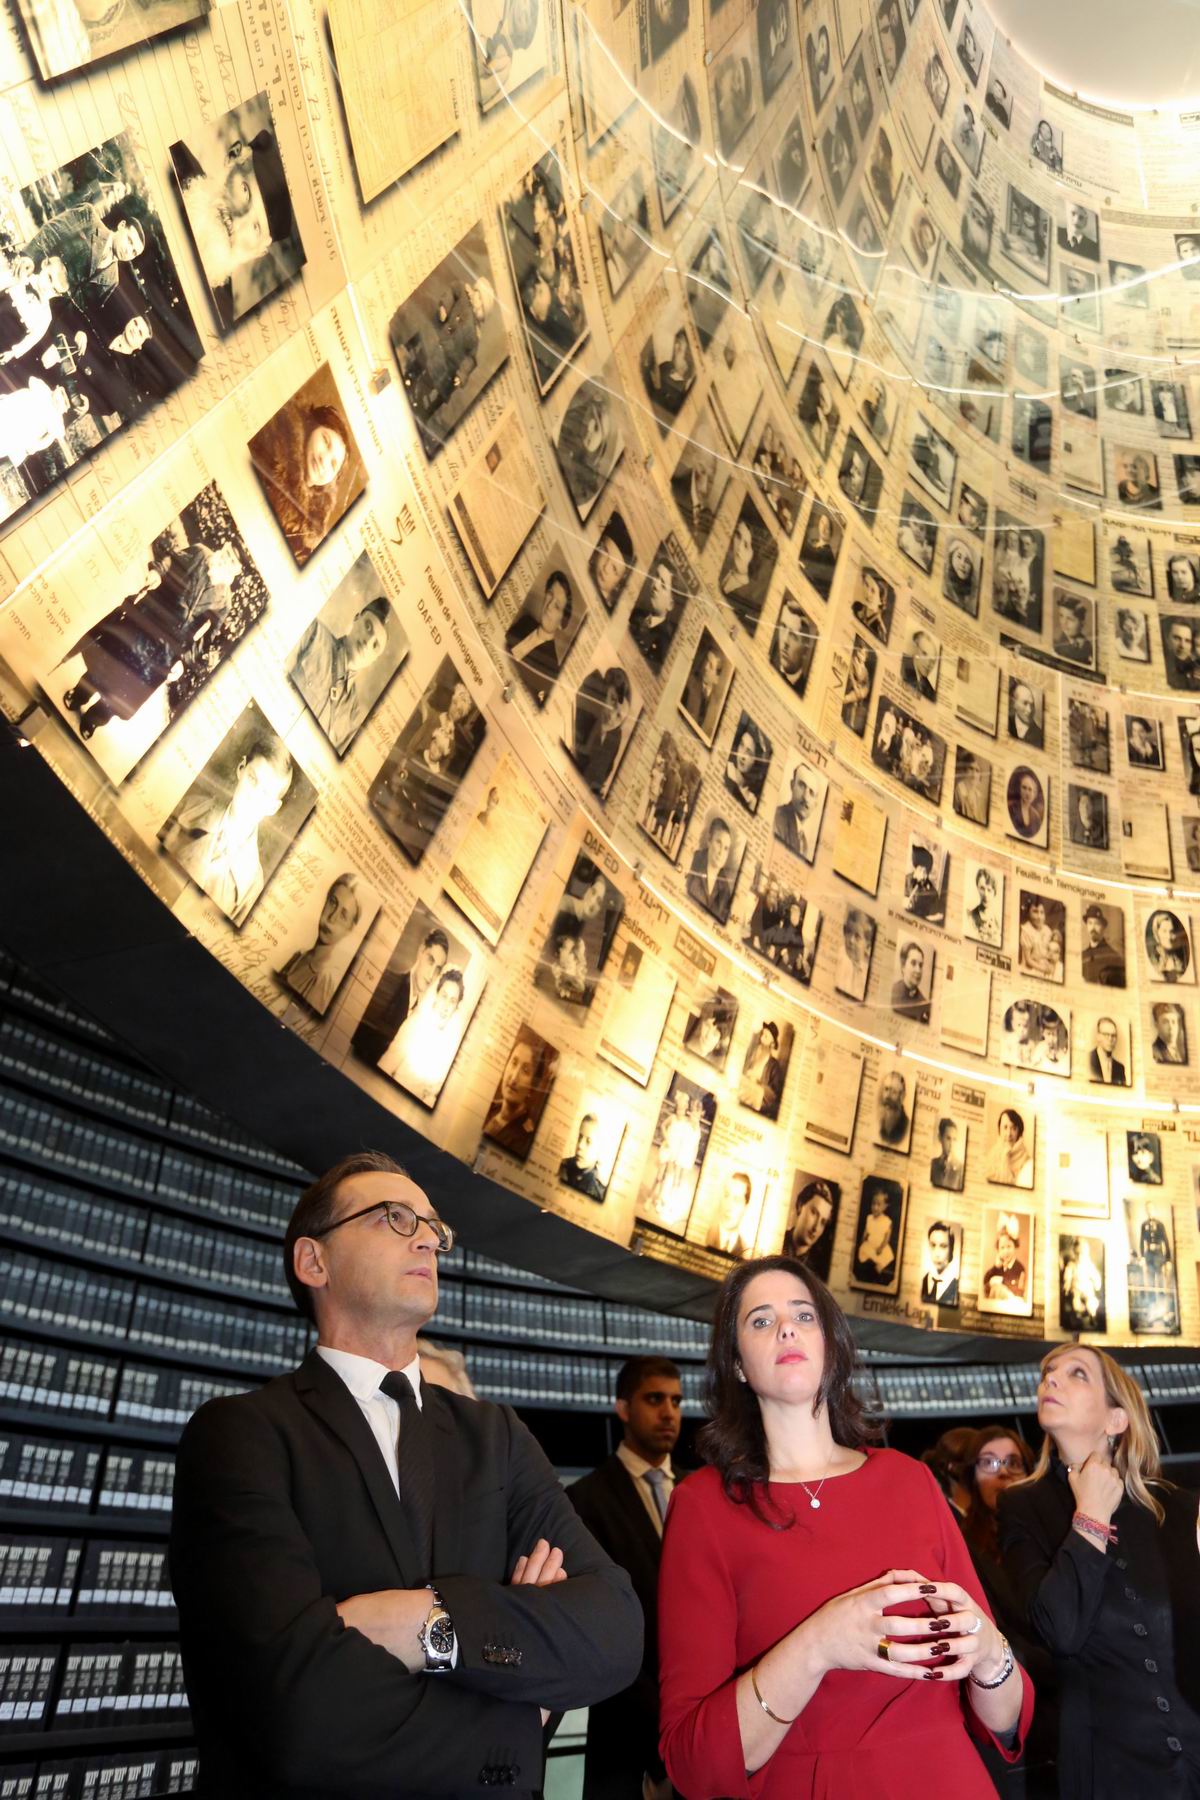 Minister Maas and Minister Shaked in the Hall of Names, commemorating the six million Jewish men, women and children murdered during the Shoah